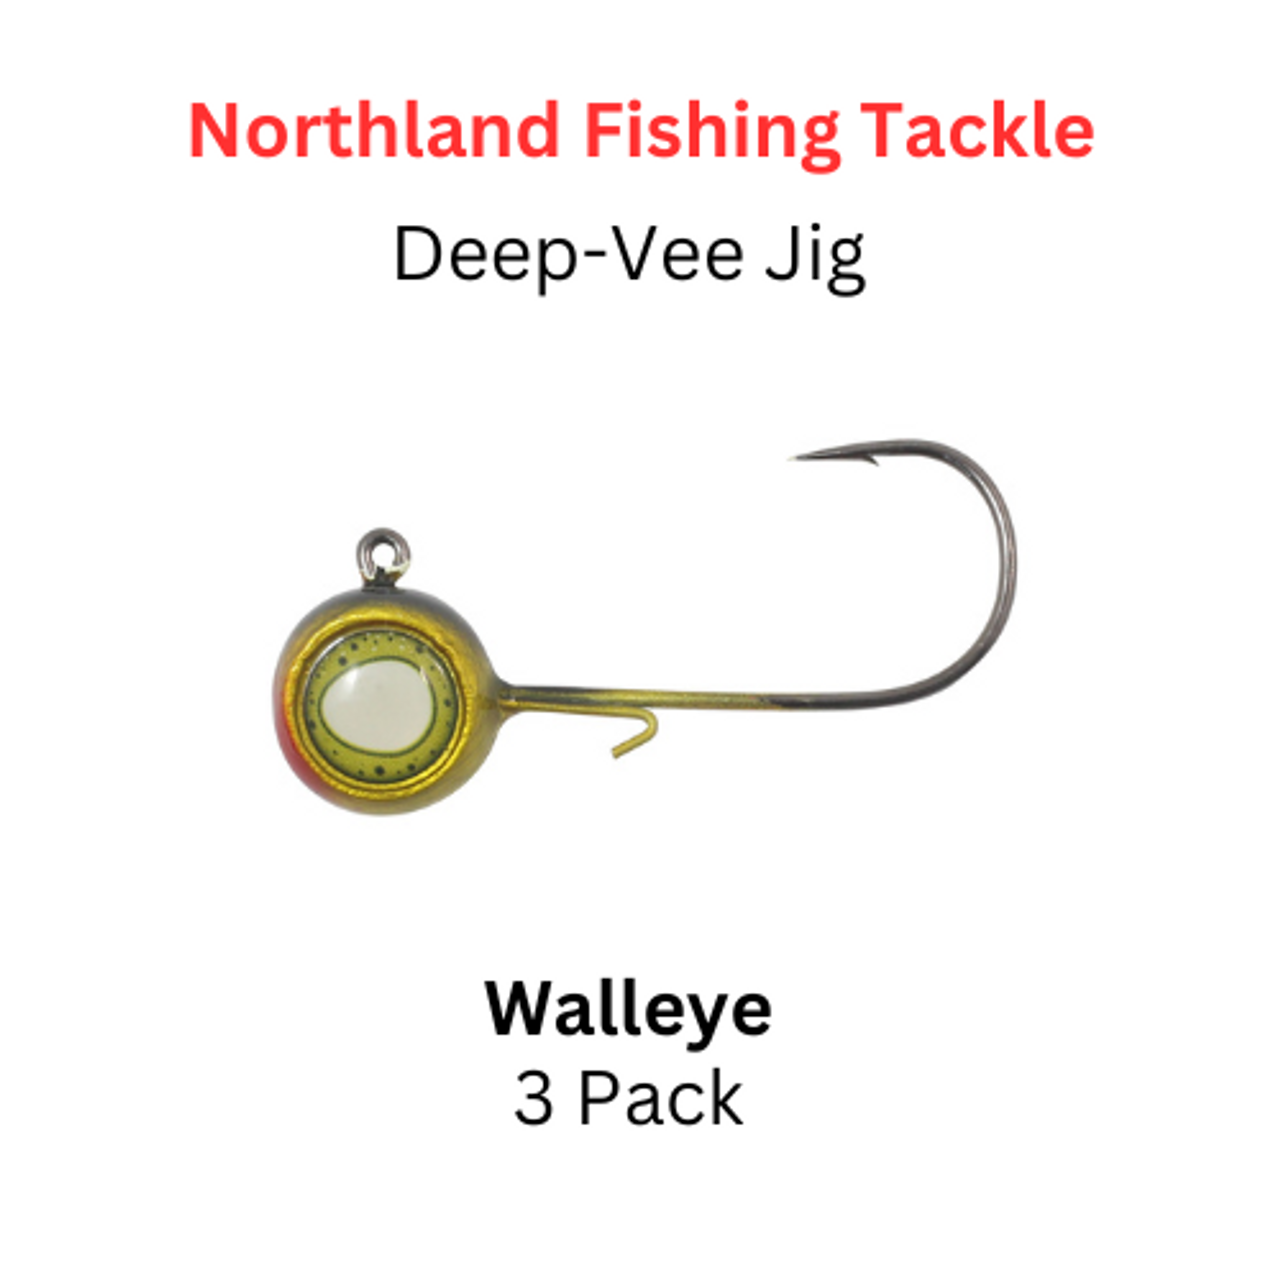 https://cdn11.bigcommerce.com/s-u9nbd/images/stencil/1280x1280/products/6393/16086/Northland_Fishing_Tackle_Deep-Vee_Jig_Walleye__95331.1677963794.png?c=2